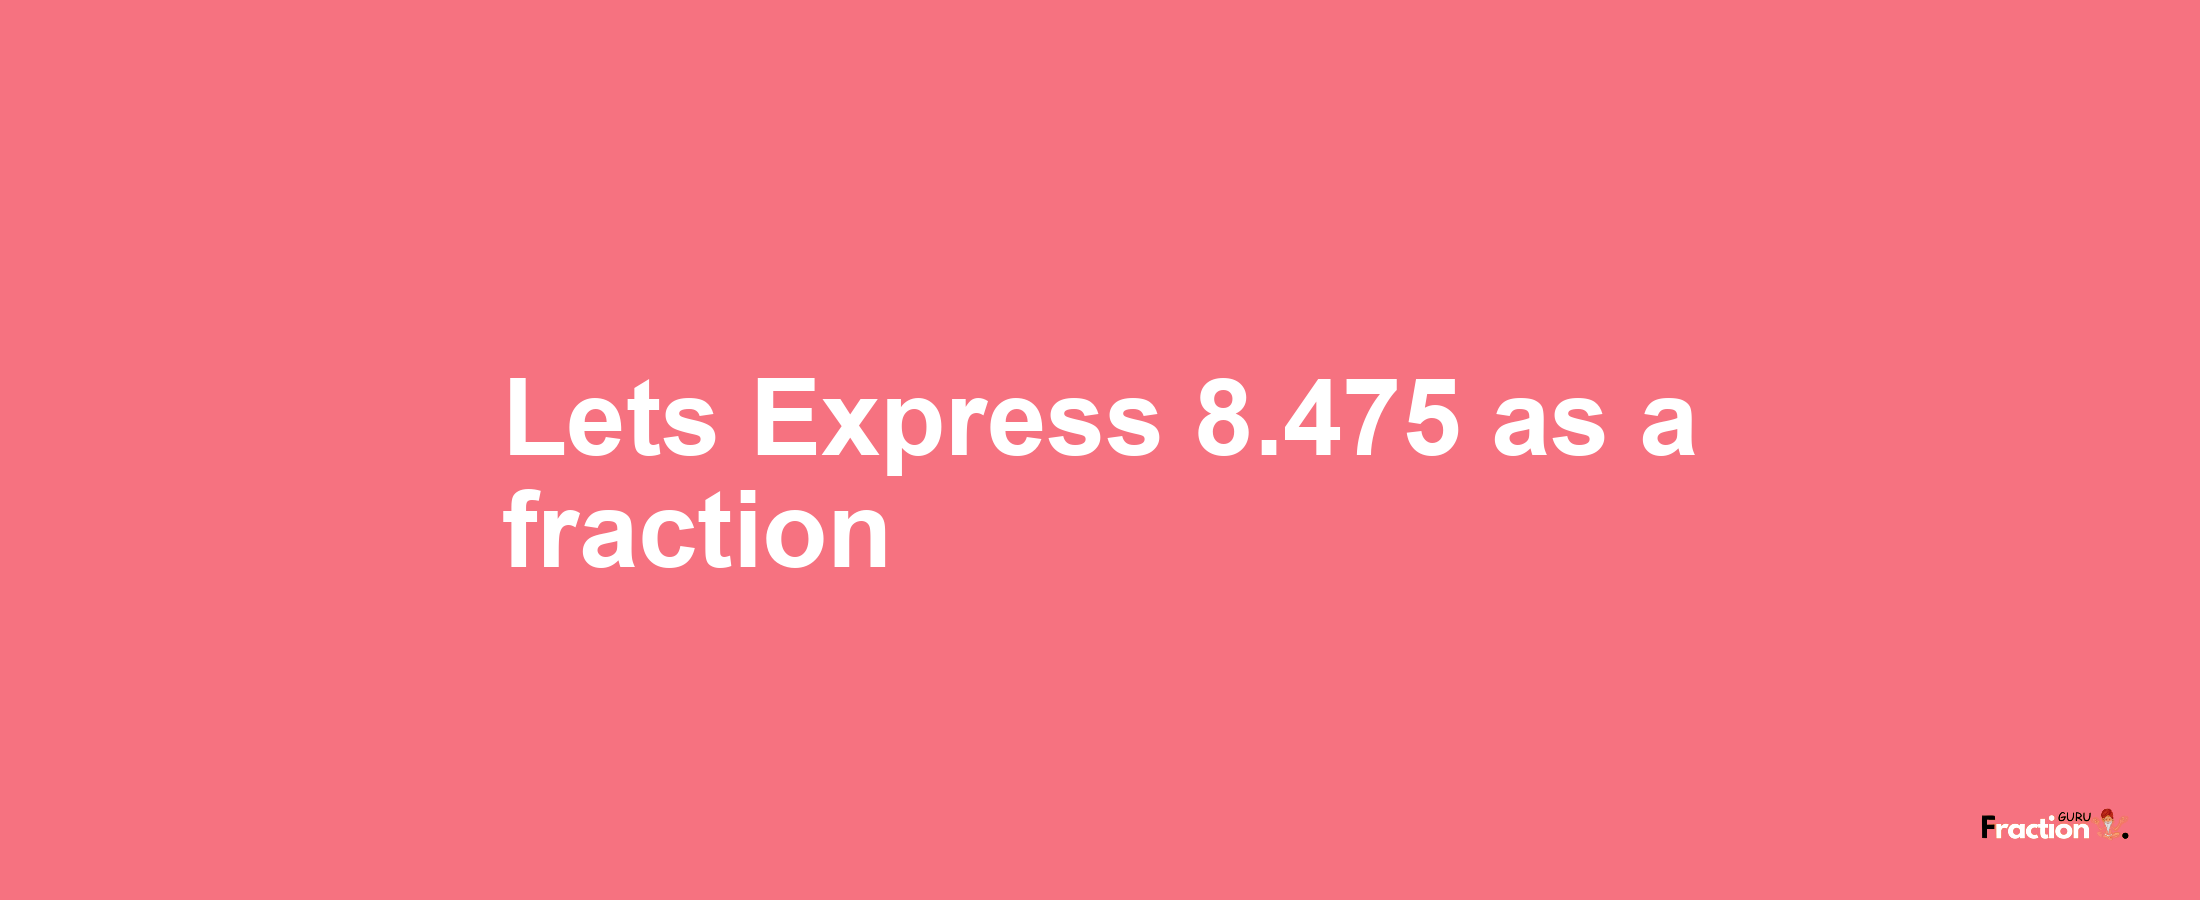 Lets Express 8.475 as afraction